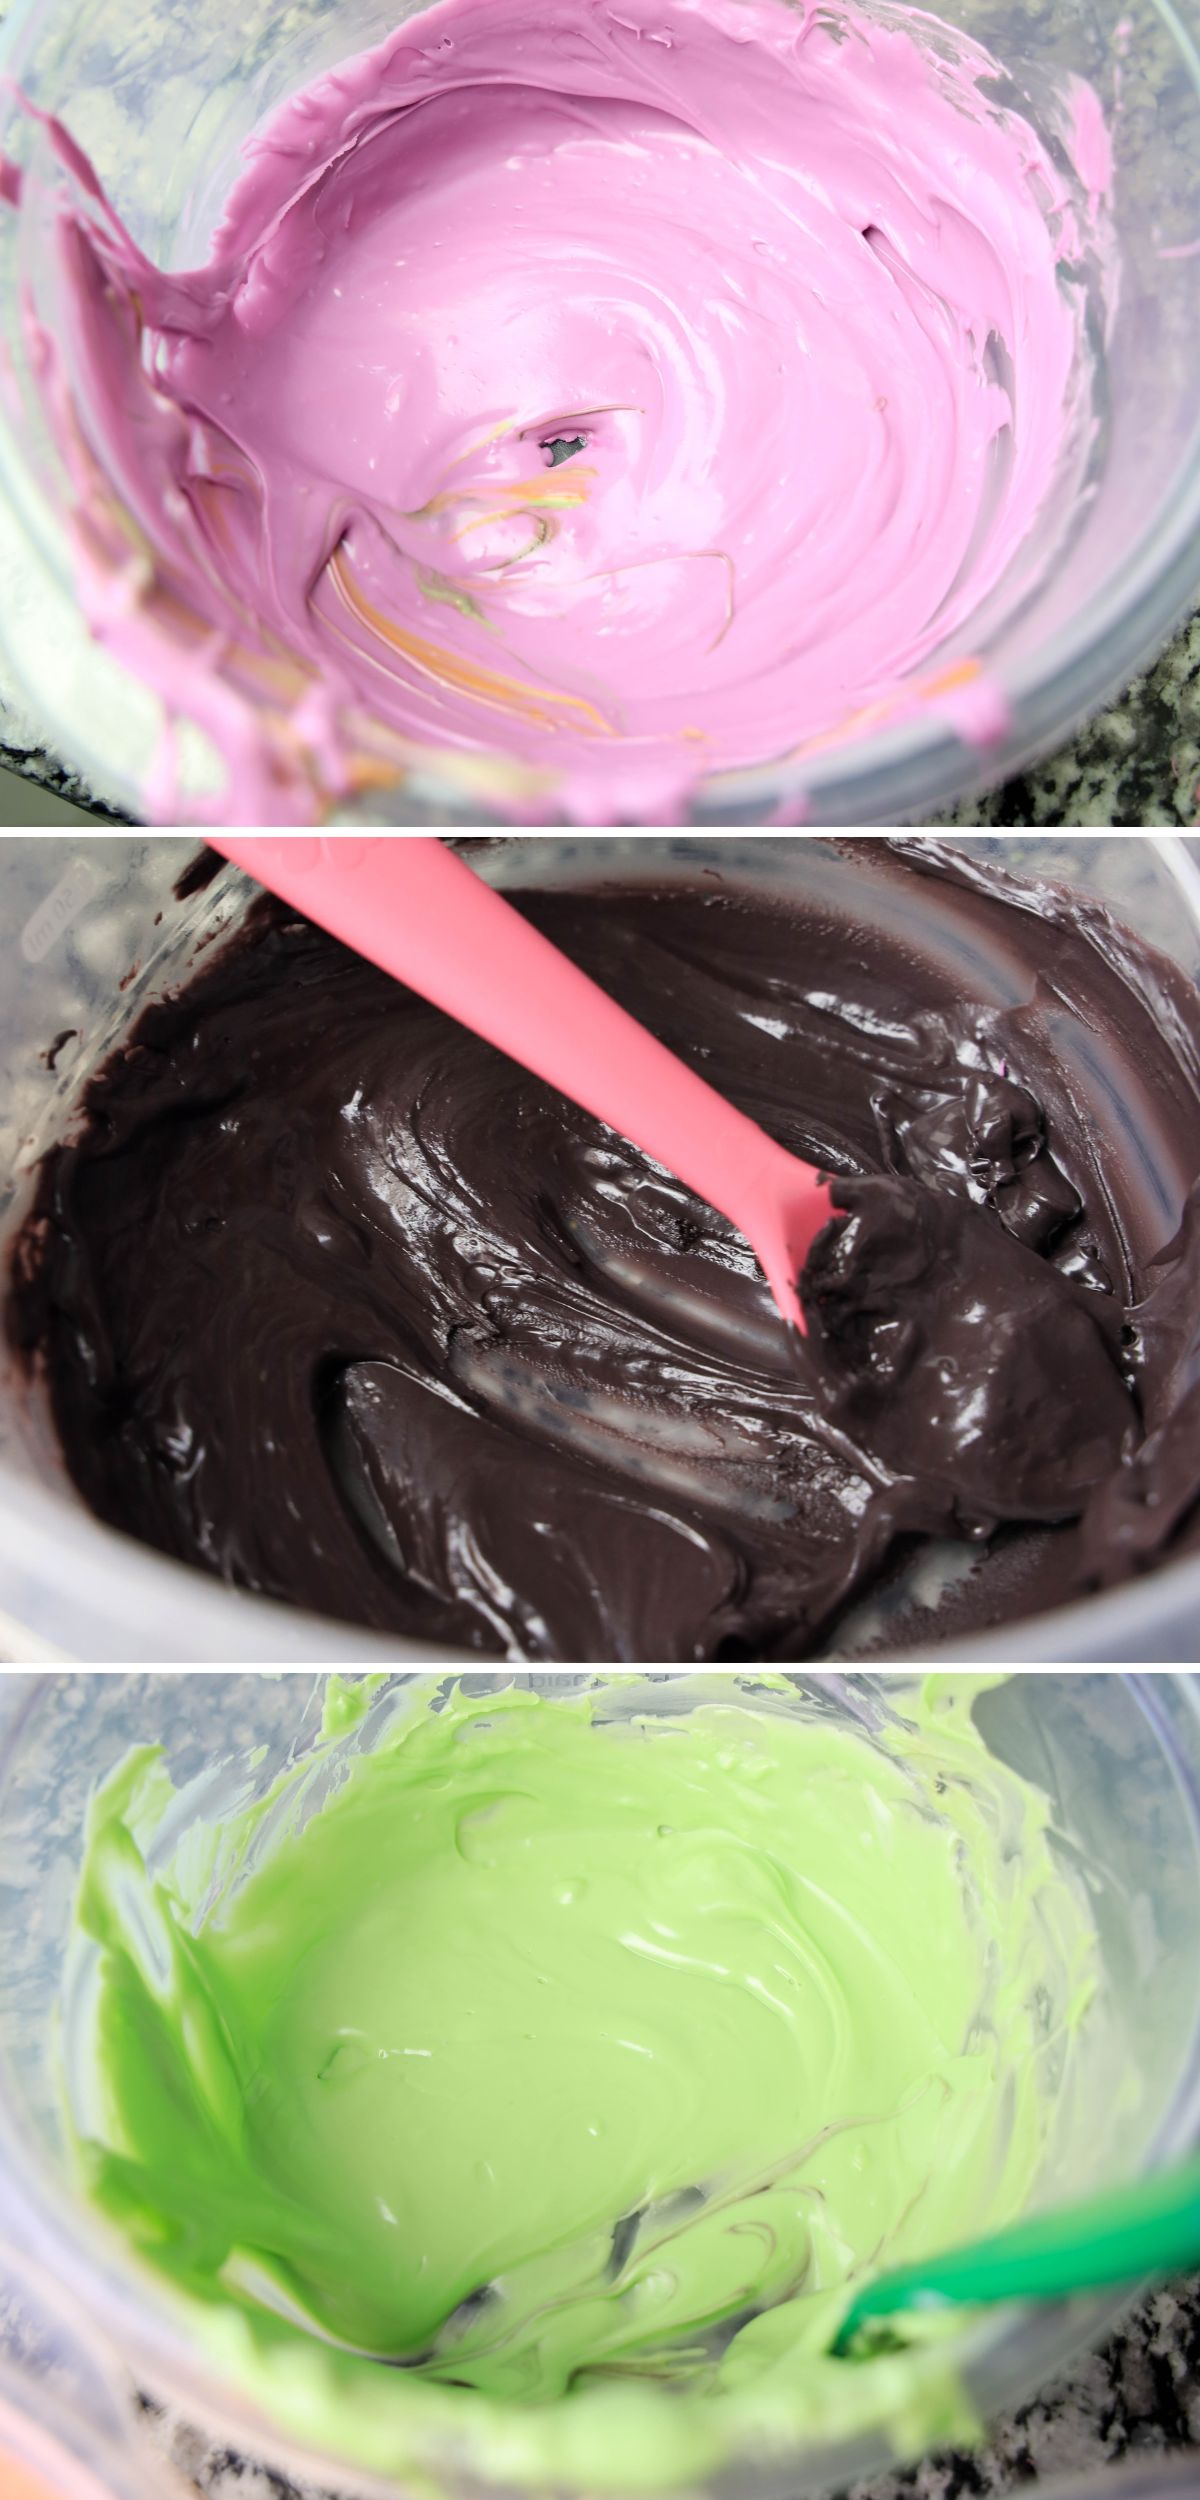 Four pictures of icing in a bowl with a pink and green spoon.